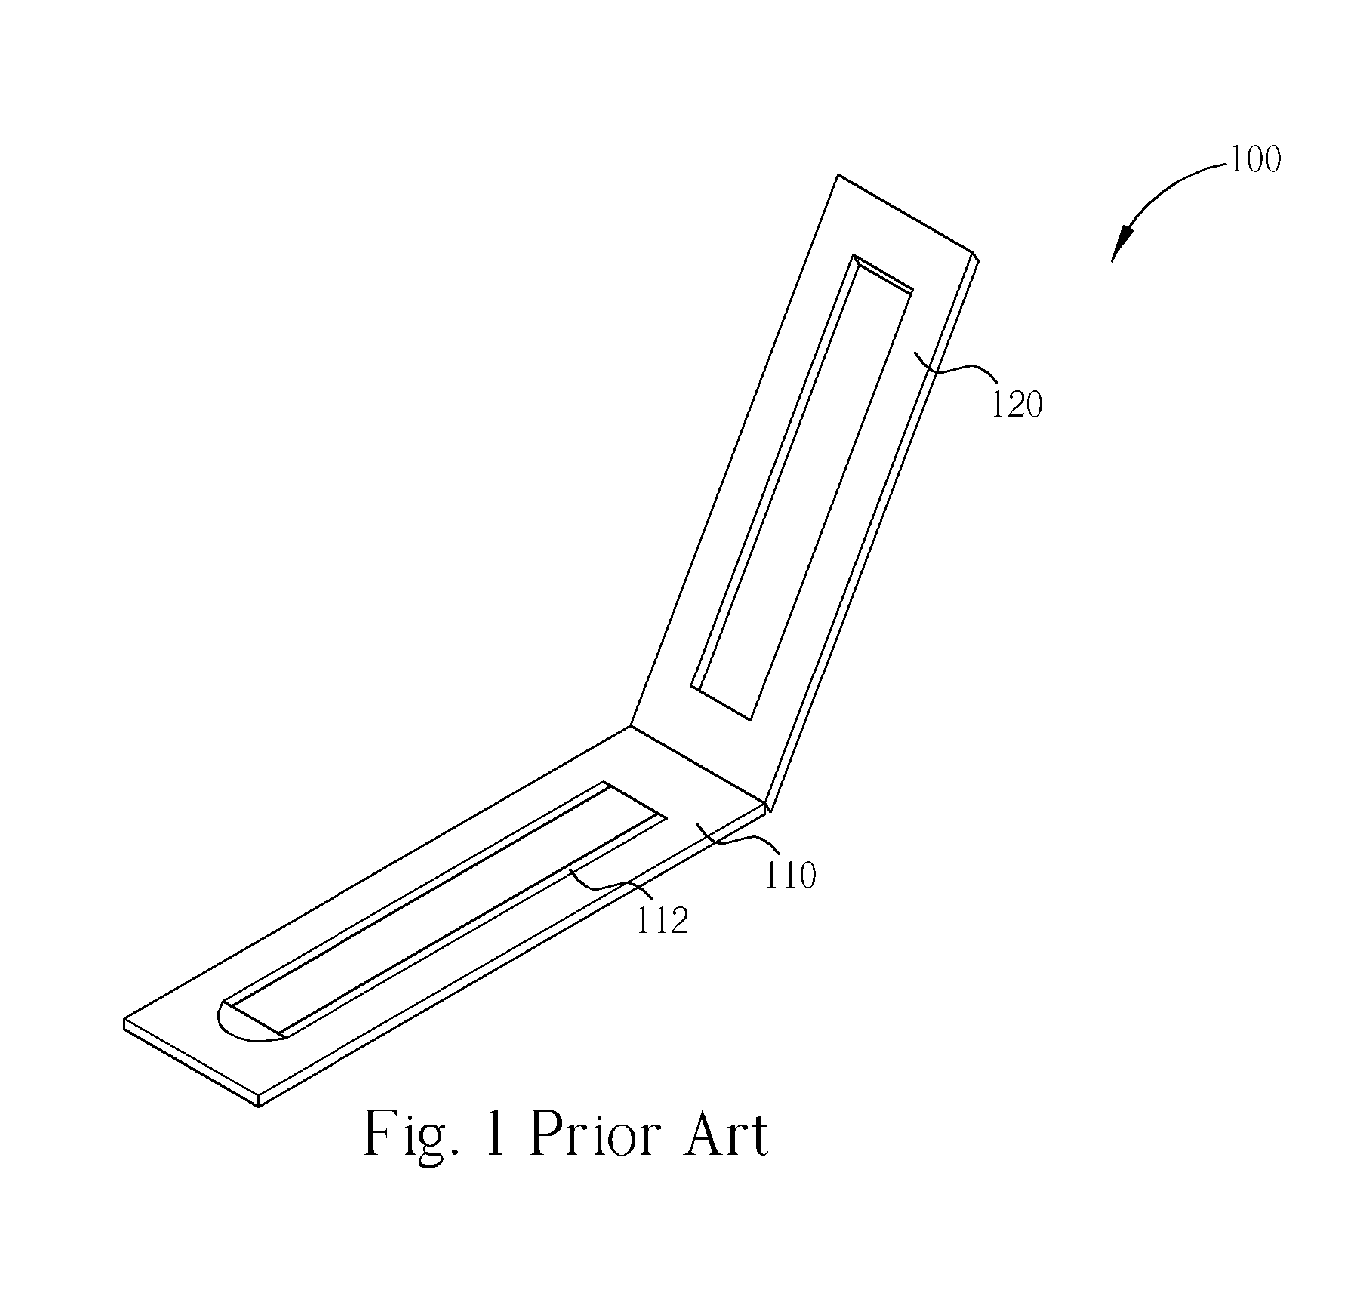 Clamp for fixing a photographic slide or negative